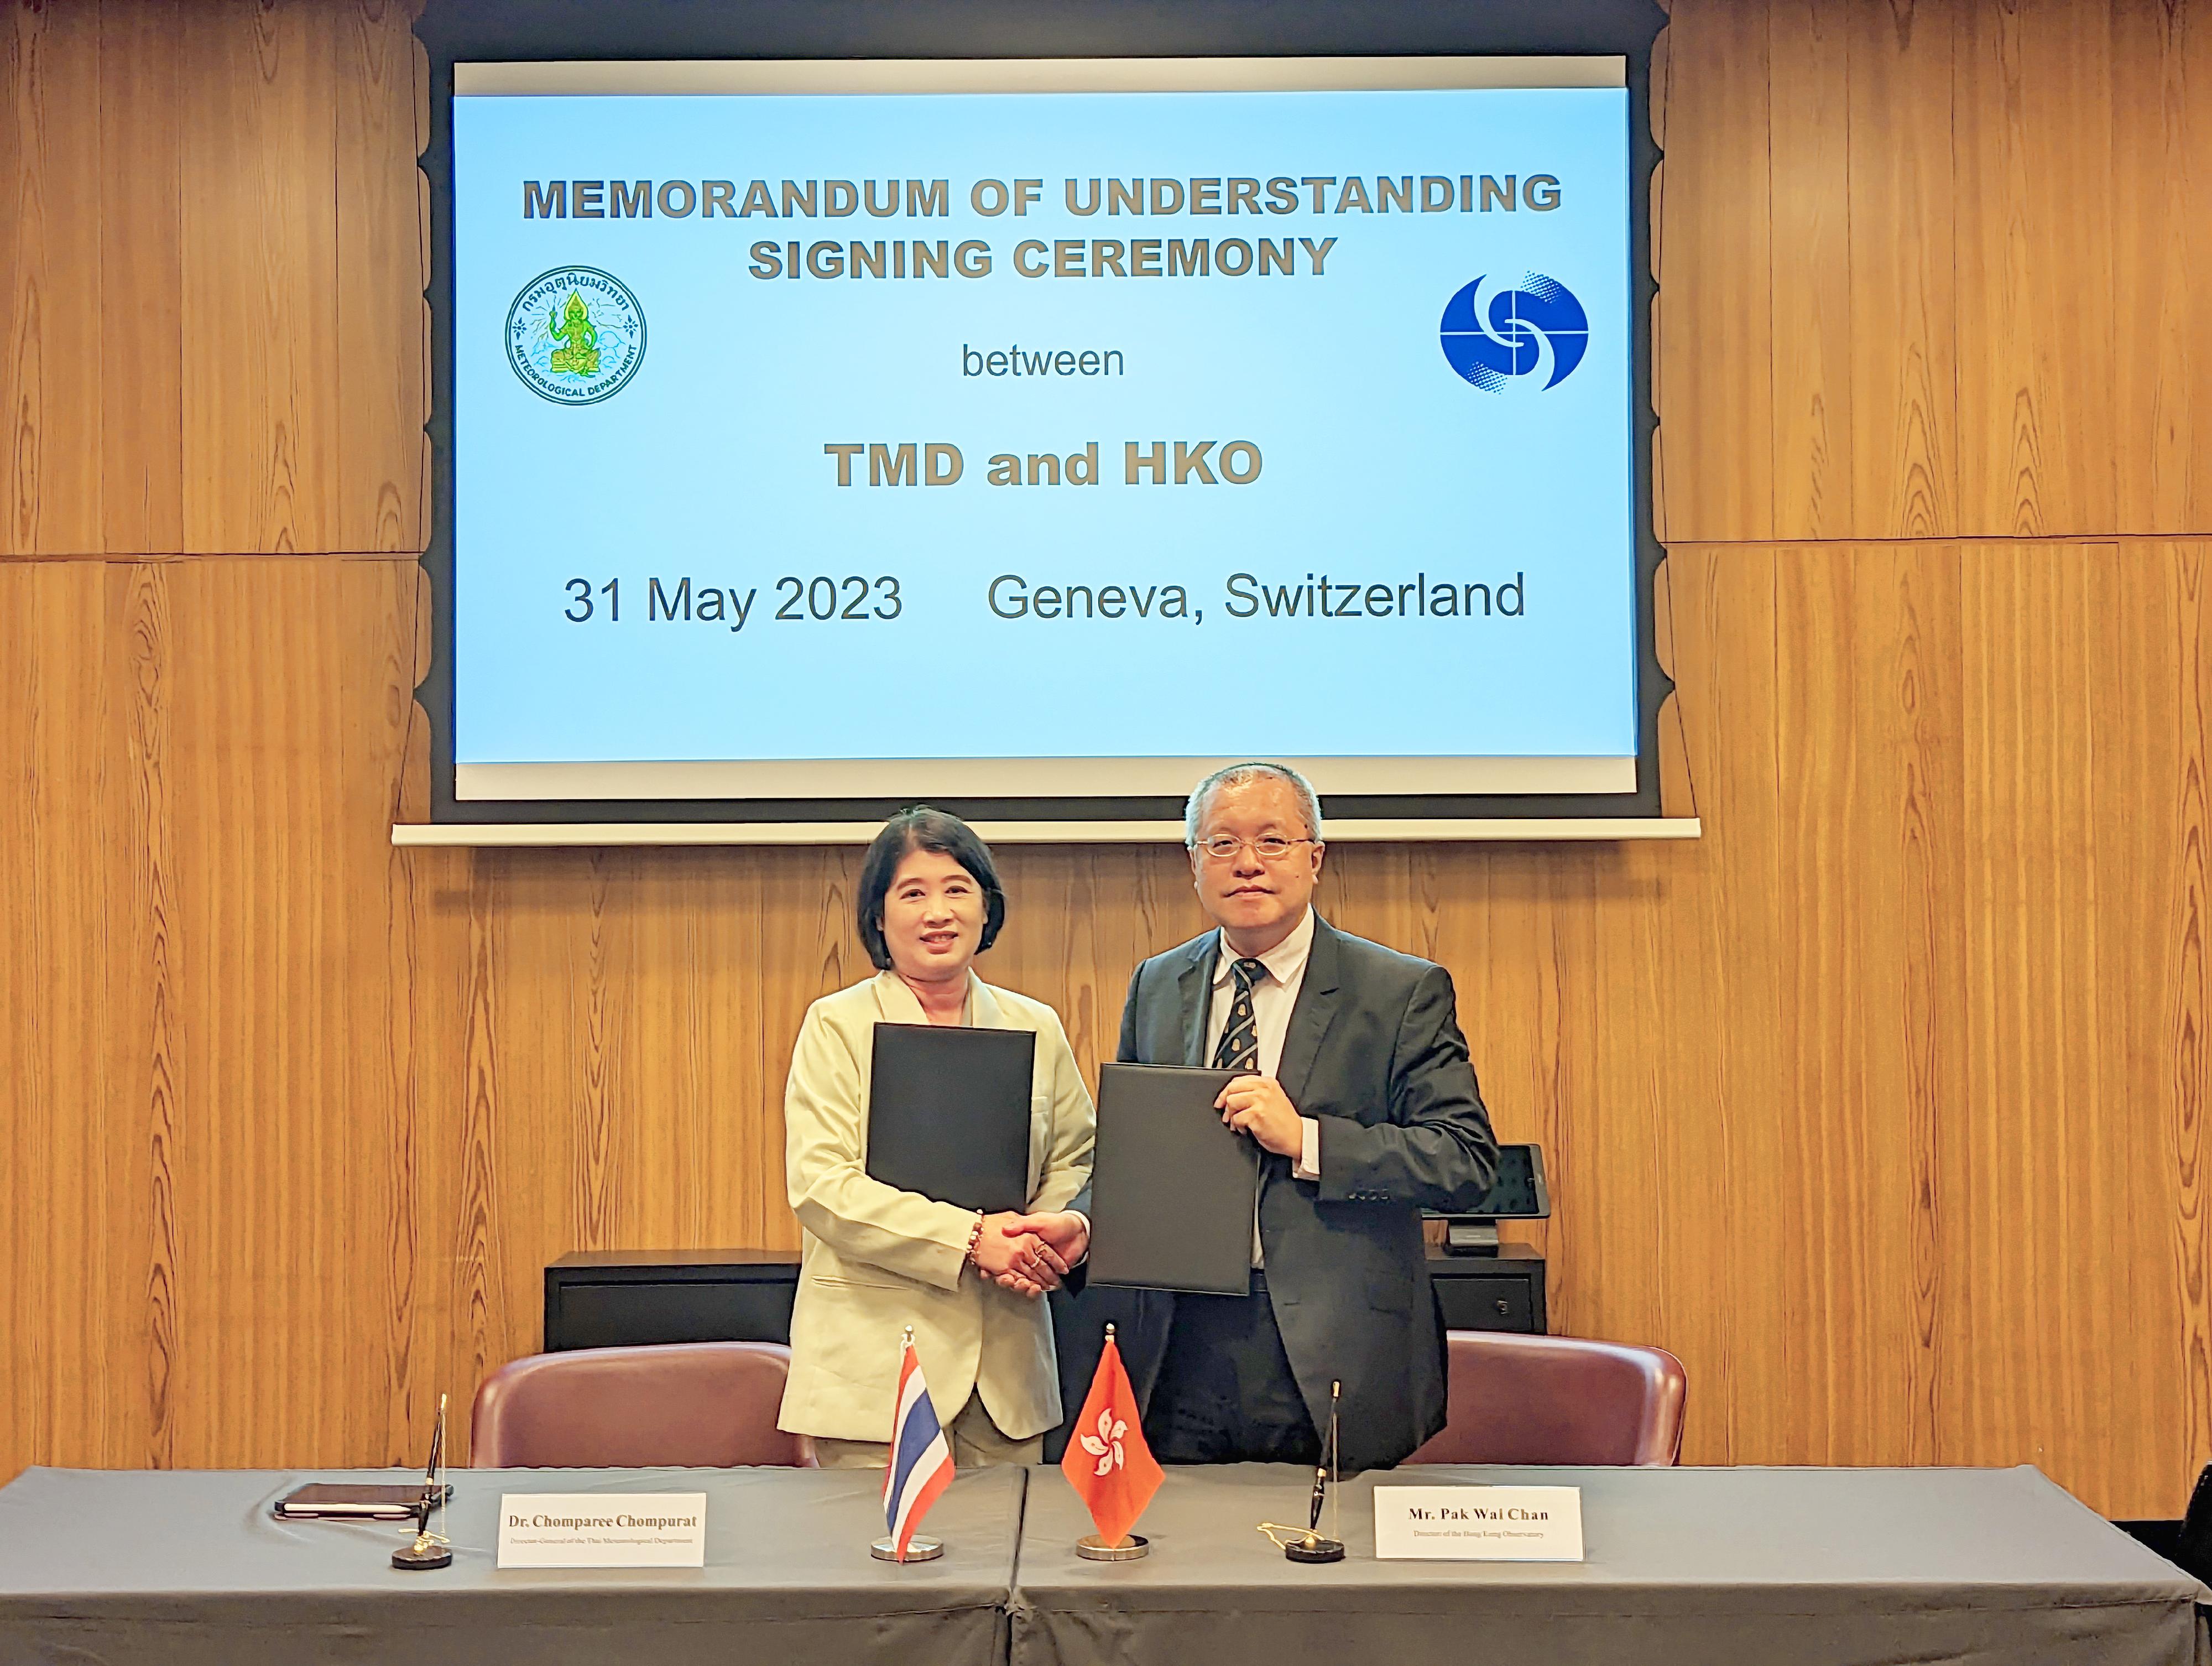 The Director of the Hong Kong Observatory, Mr Chan Pak-wai (right), and the Director-General of the Thai Meteorological Department, Dr Chomparee Chompurat (left), signed the renewed memorandum of understanding to further strengthen meteorological collaboration yesterday (May 31, Geneva time).